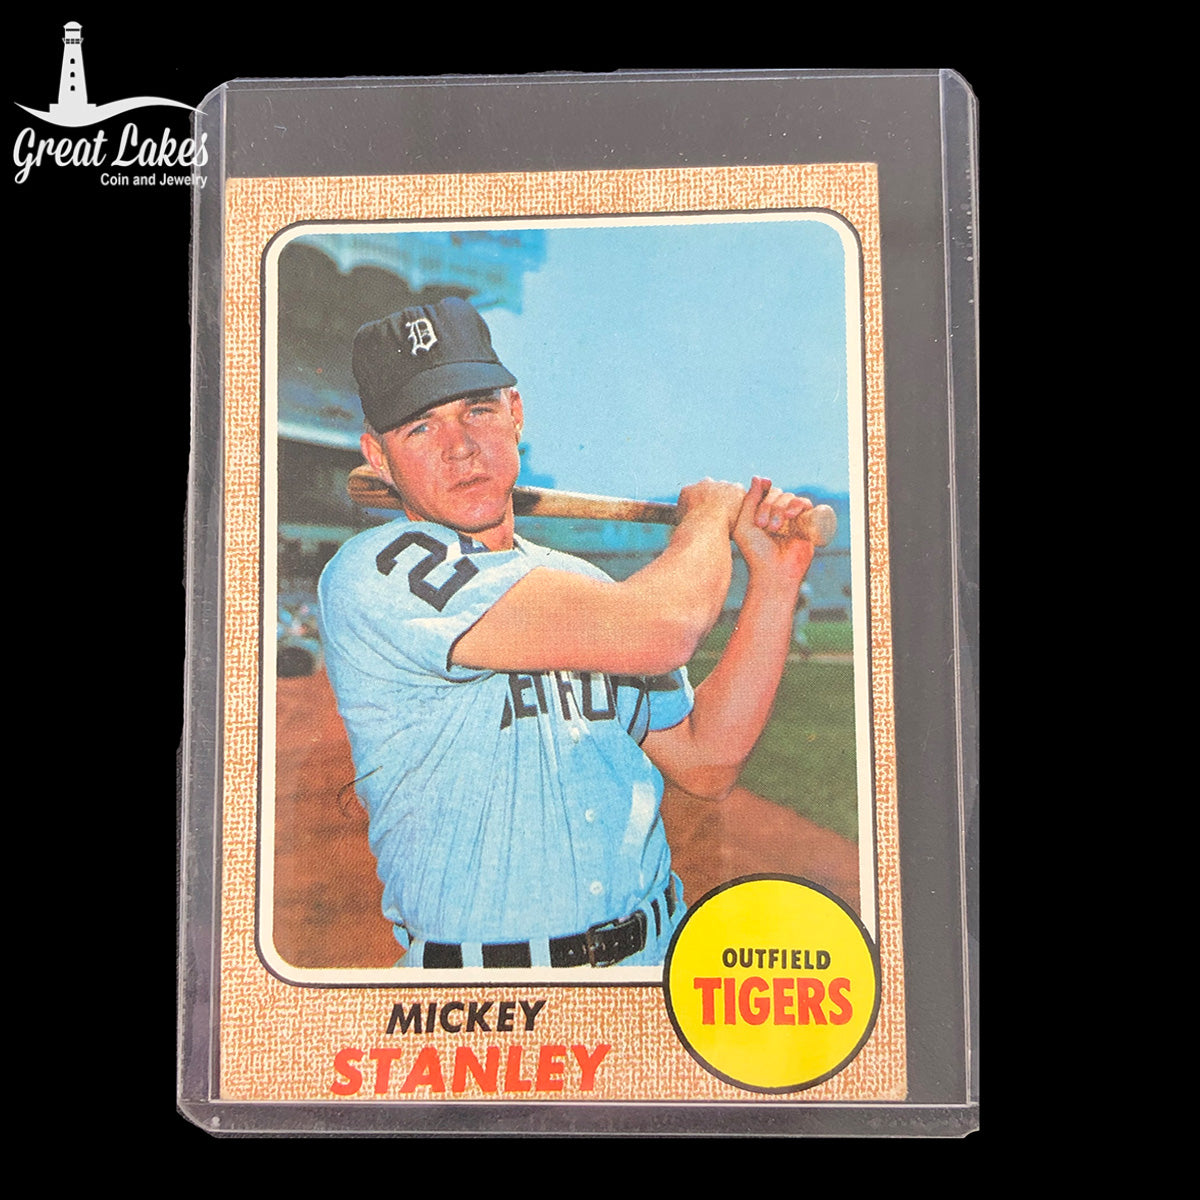 1968 Topps Mickey Stanley Card #129